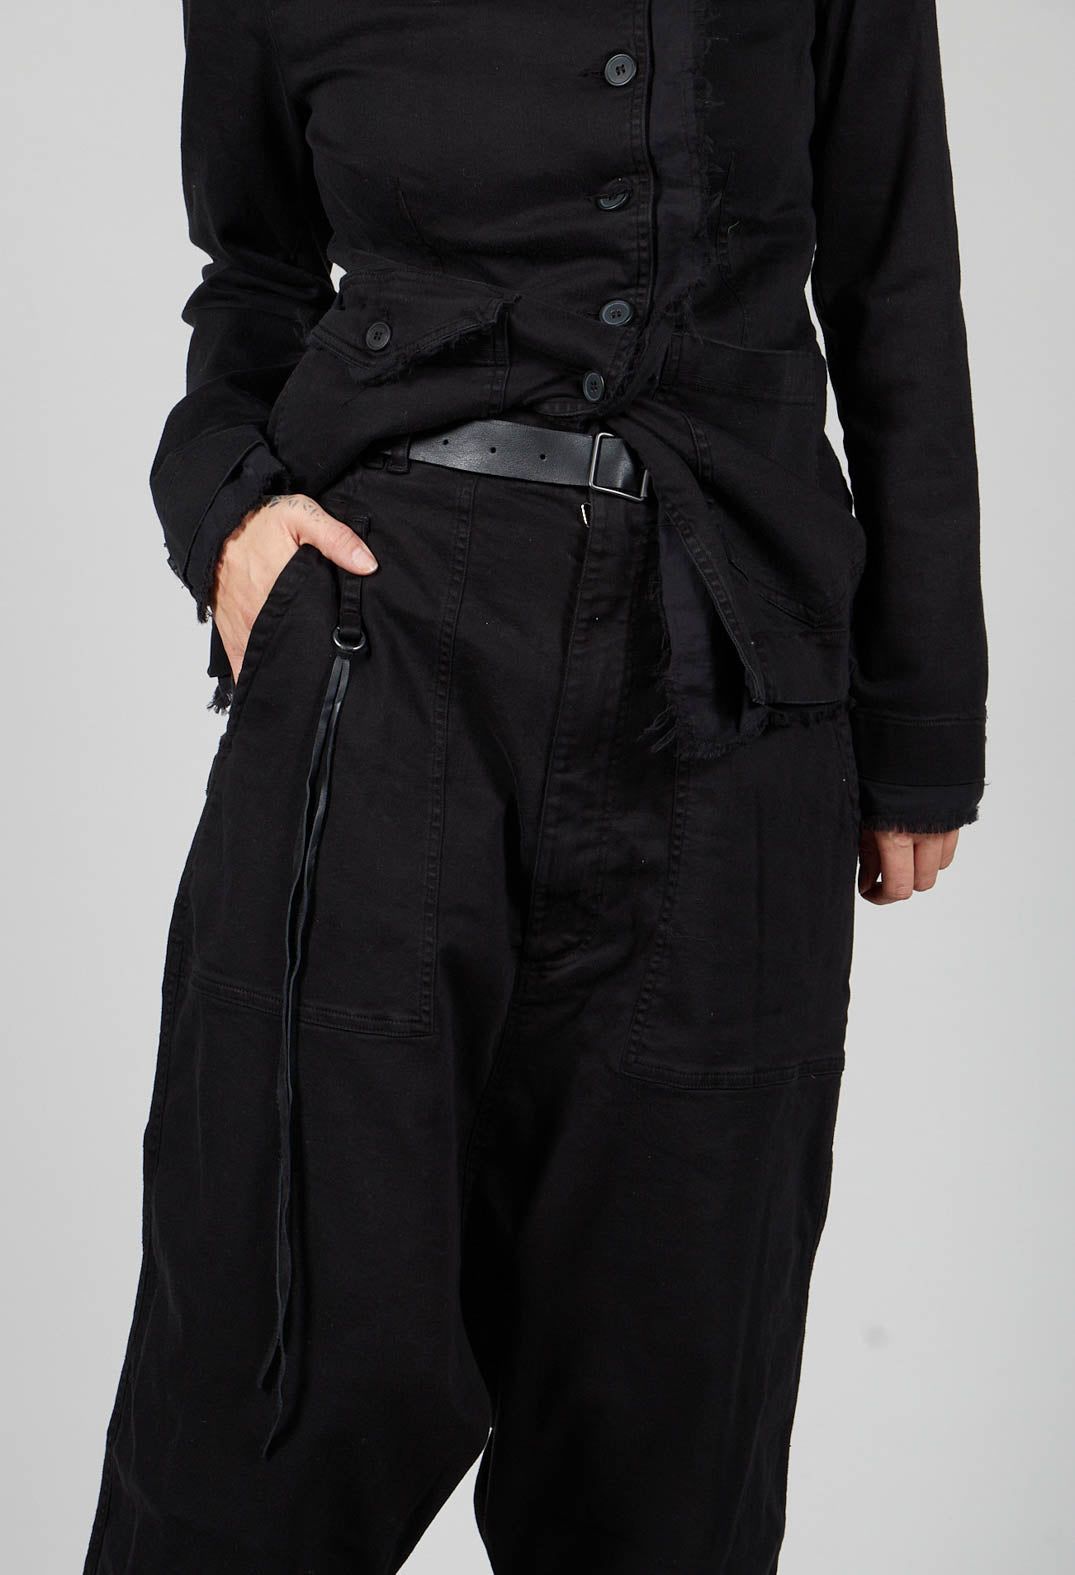 Double Belted Trousers in Black